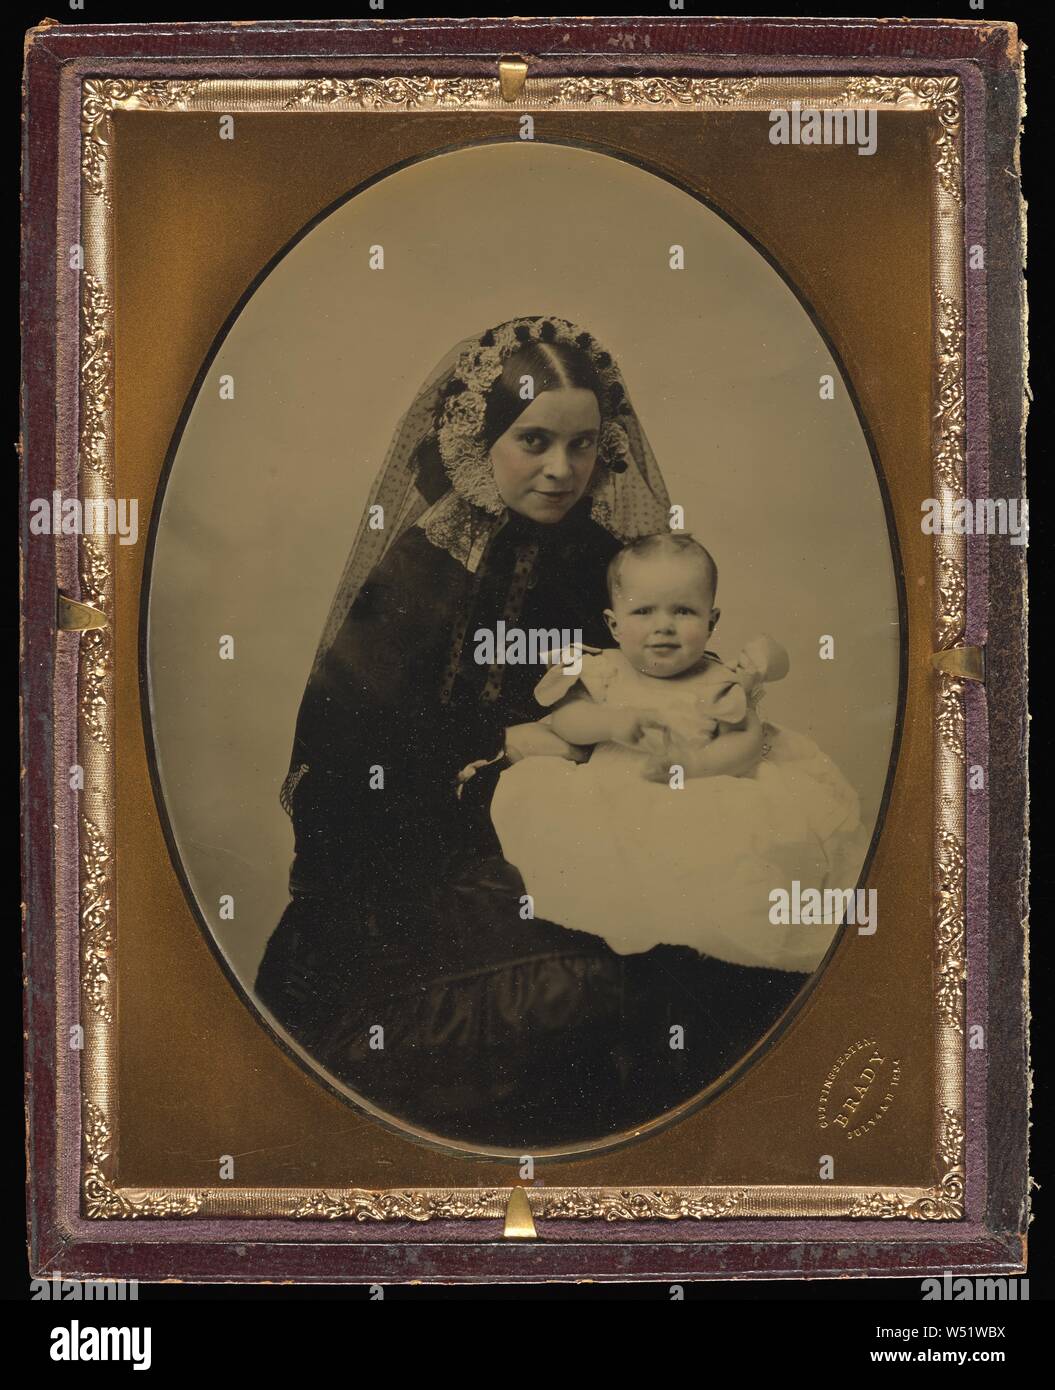 Portrait of a woman and child, Mathew B. Brady (American, about 1823 - 1896), about 1851, Ambrotype, hand-colored, 12.4 × 9.2 cm (4 7/8 × 3 5/8 in Stock Photo